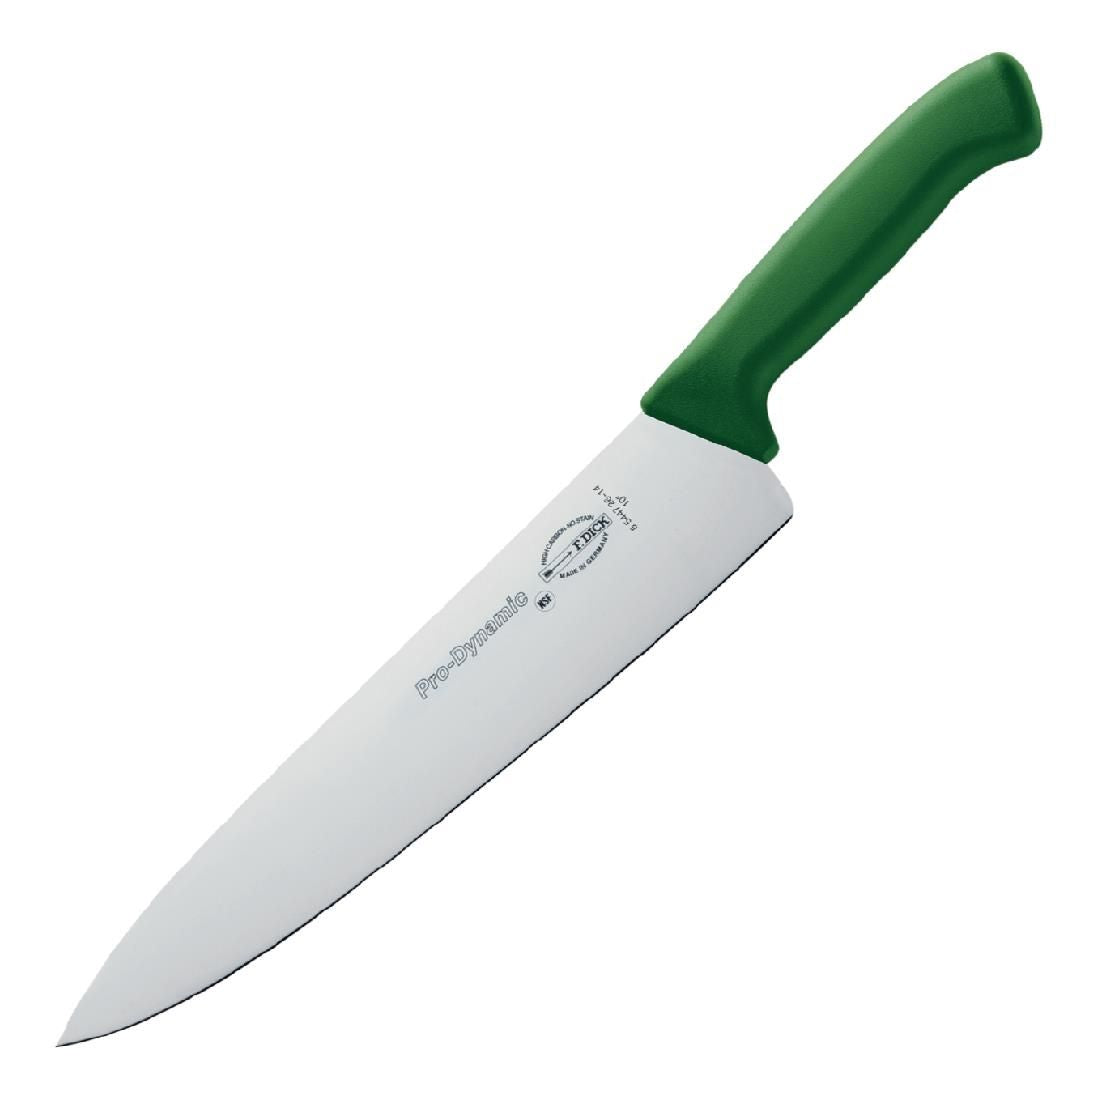 DL366 Dick Pro Dynamic HACCP Chefs Knife Green 25.5cm JD Catering Equipment Solutions Ltd